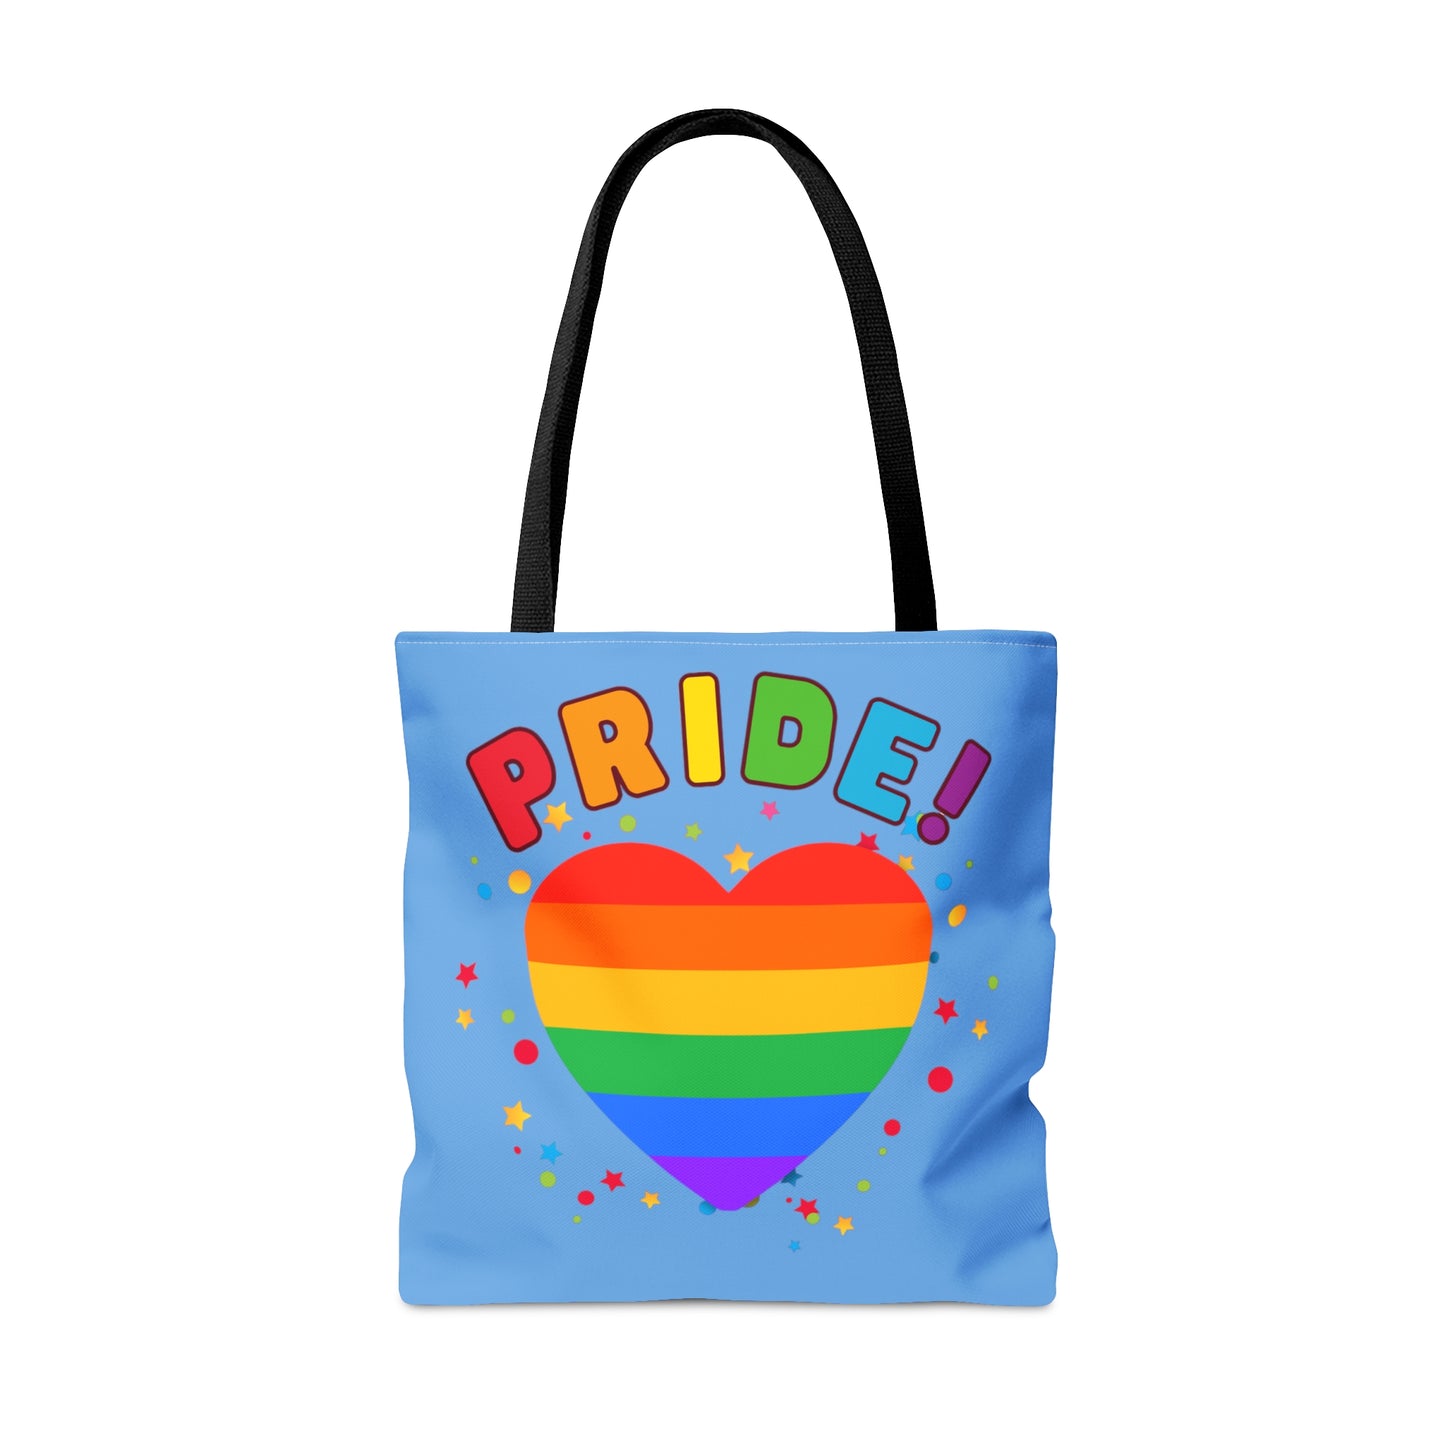 Celebrate PRIDE with this colorful Tote Bag in 3 sizes to meet your needs.